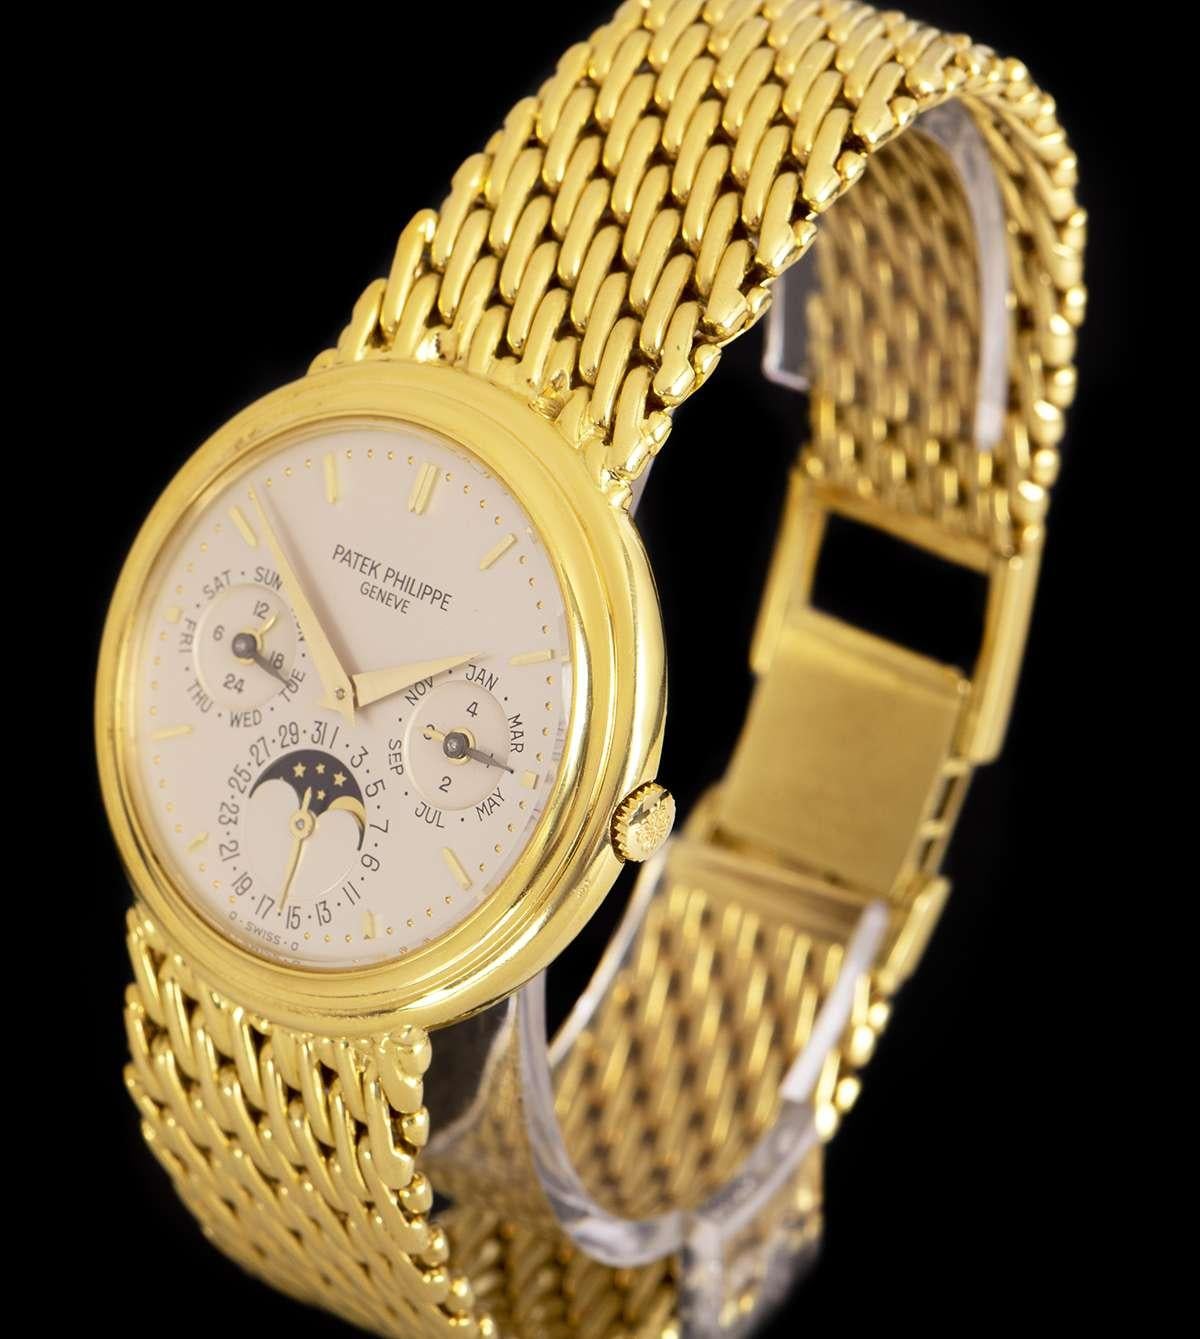 An 18k Yellow Gold Perpetual Calendar Gents Wristwatch, silvered opaline dial with applied hour markers, month and leap year sub-dial at 3 0'clock, date and moonphase display at 6 0'clock, weekday and 24 hour sub-dial at 9 0'clock, a fixed 18k